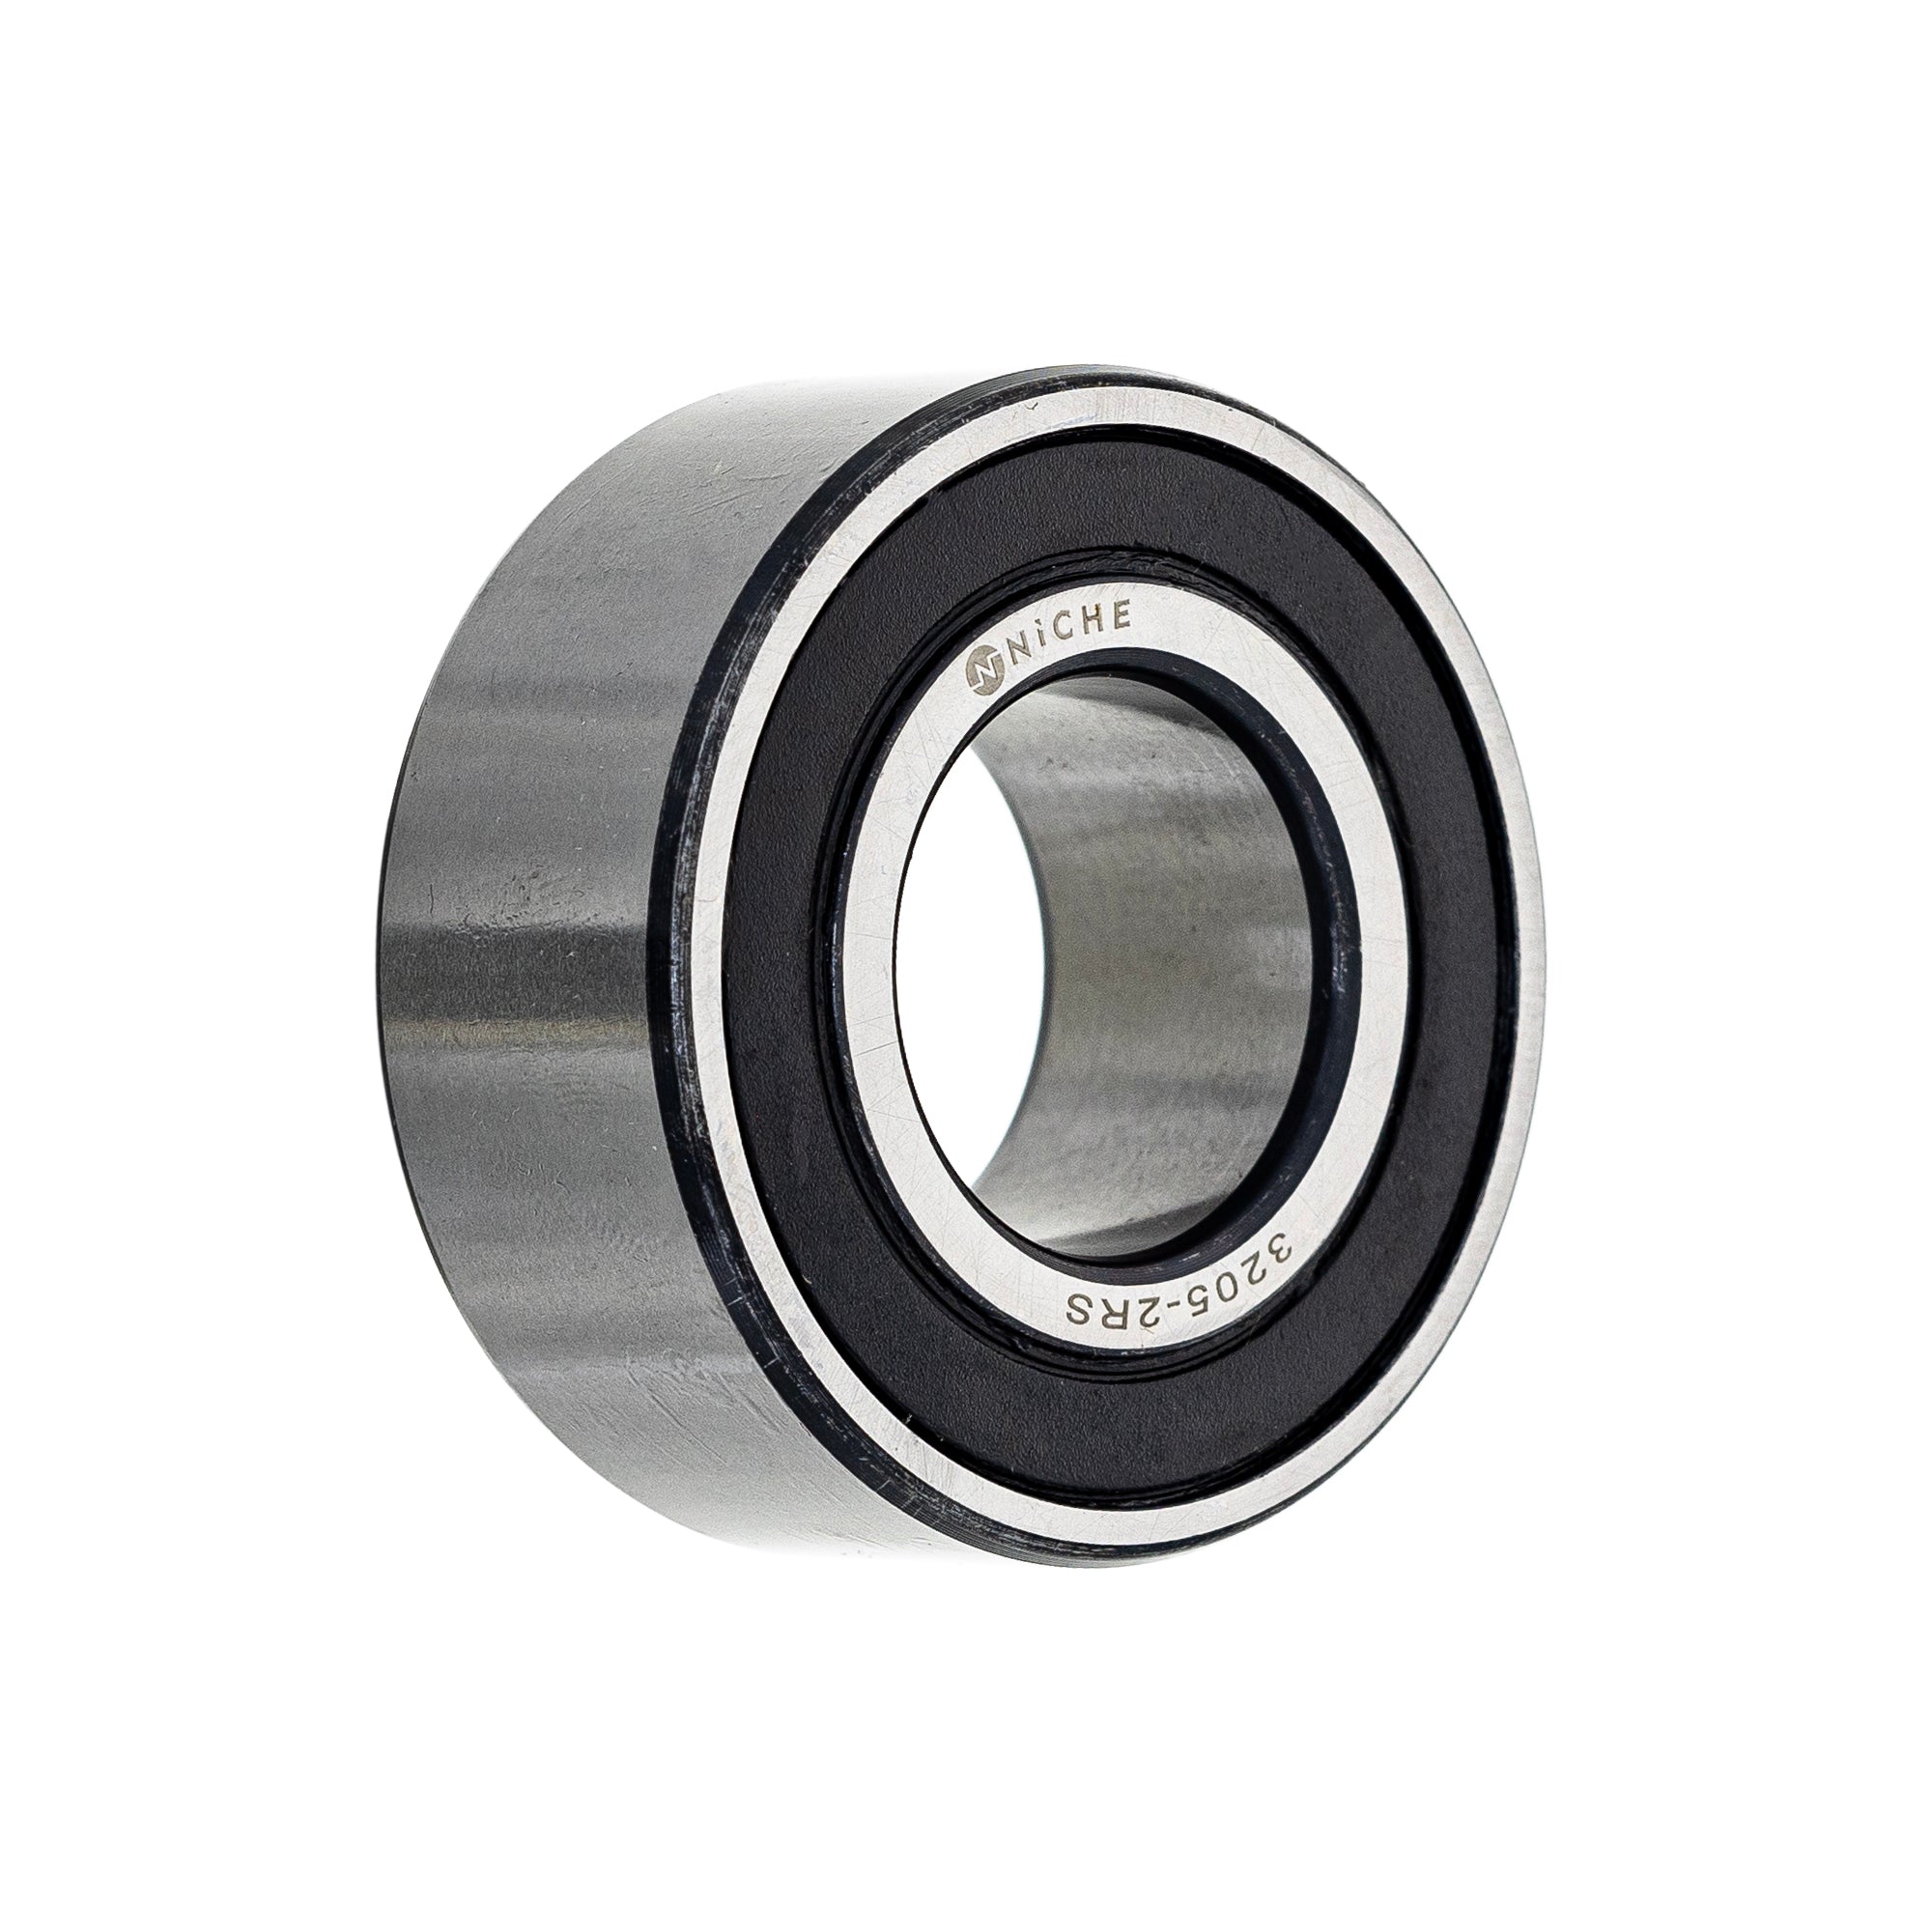 Double Row, Angular Contact, Ball Bearing for zOTHER ST1300 R850R R1150GS R1100RS NICHE 519-CBB2284R